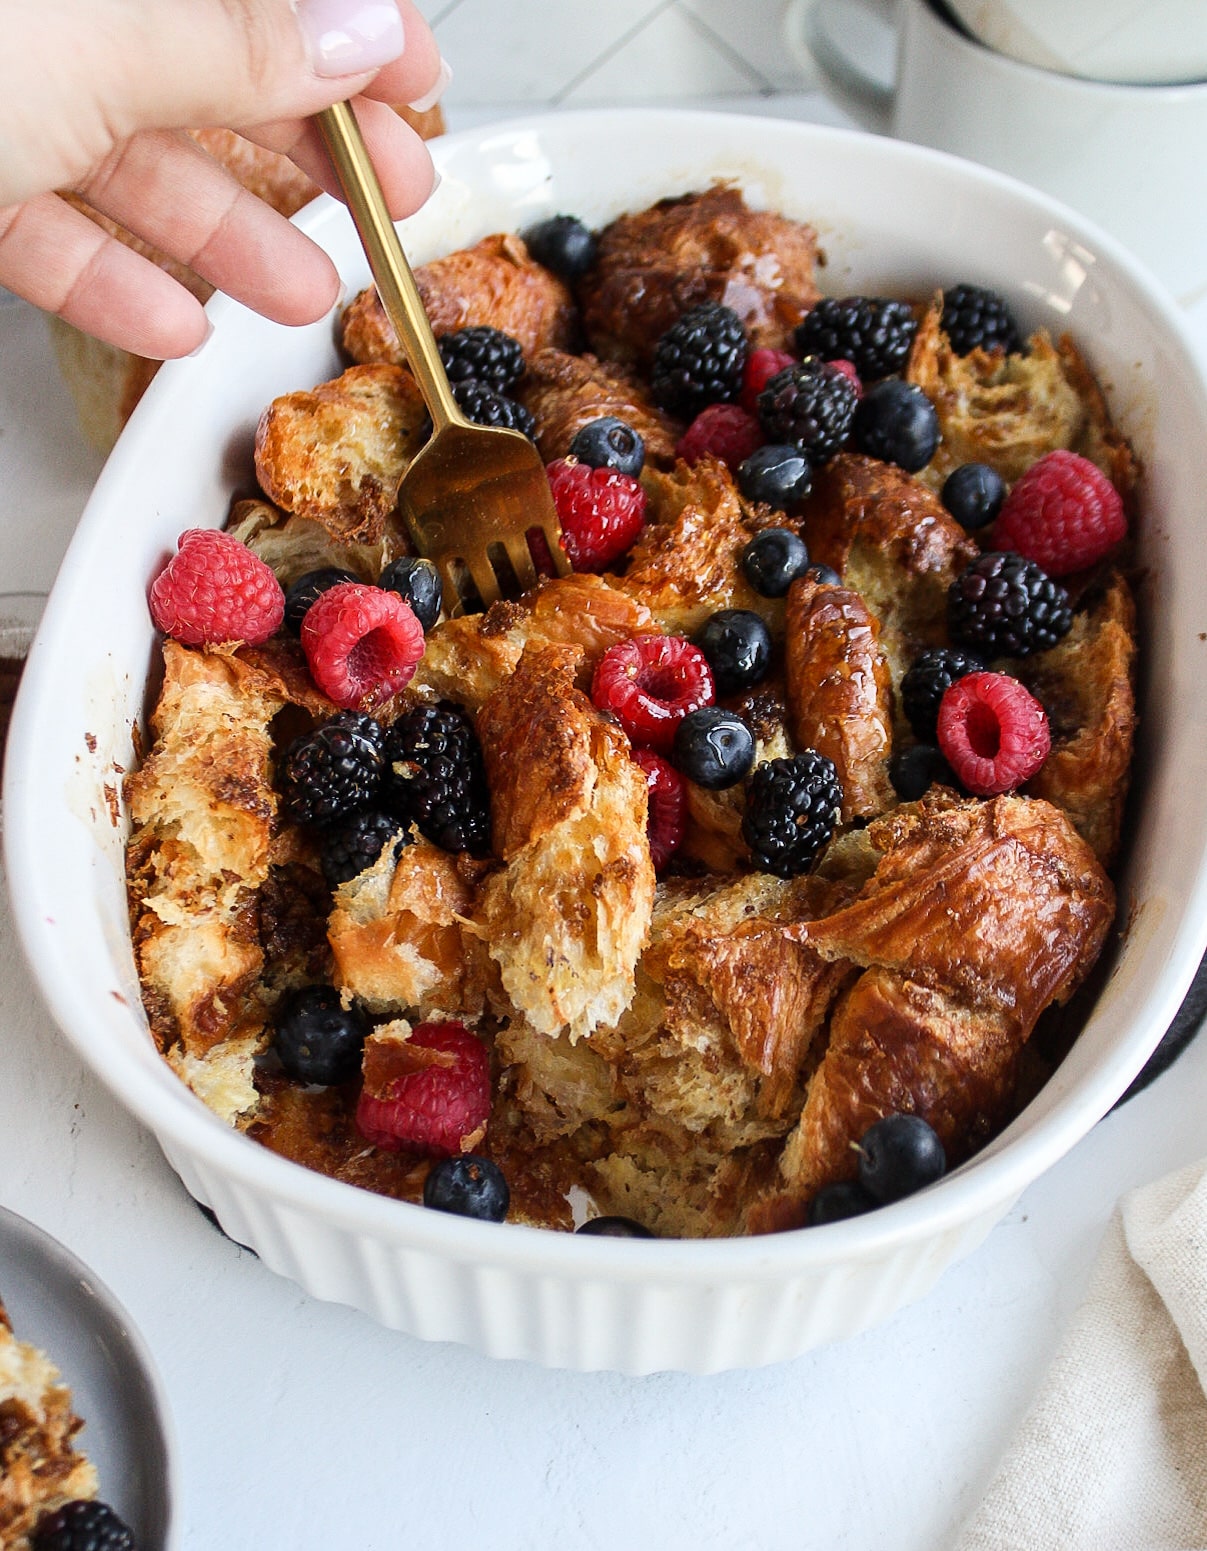 a fork taking a piece from the croissant french toast bake